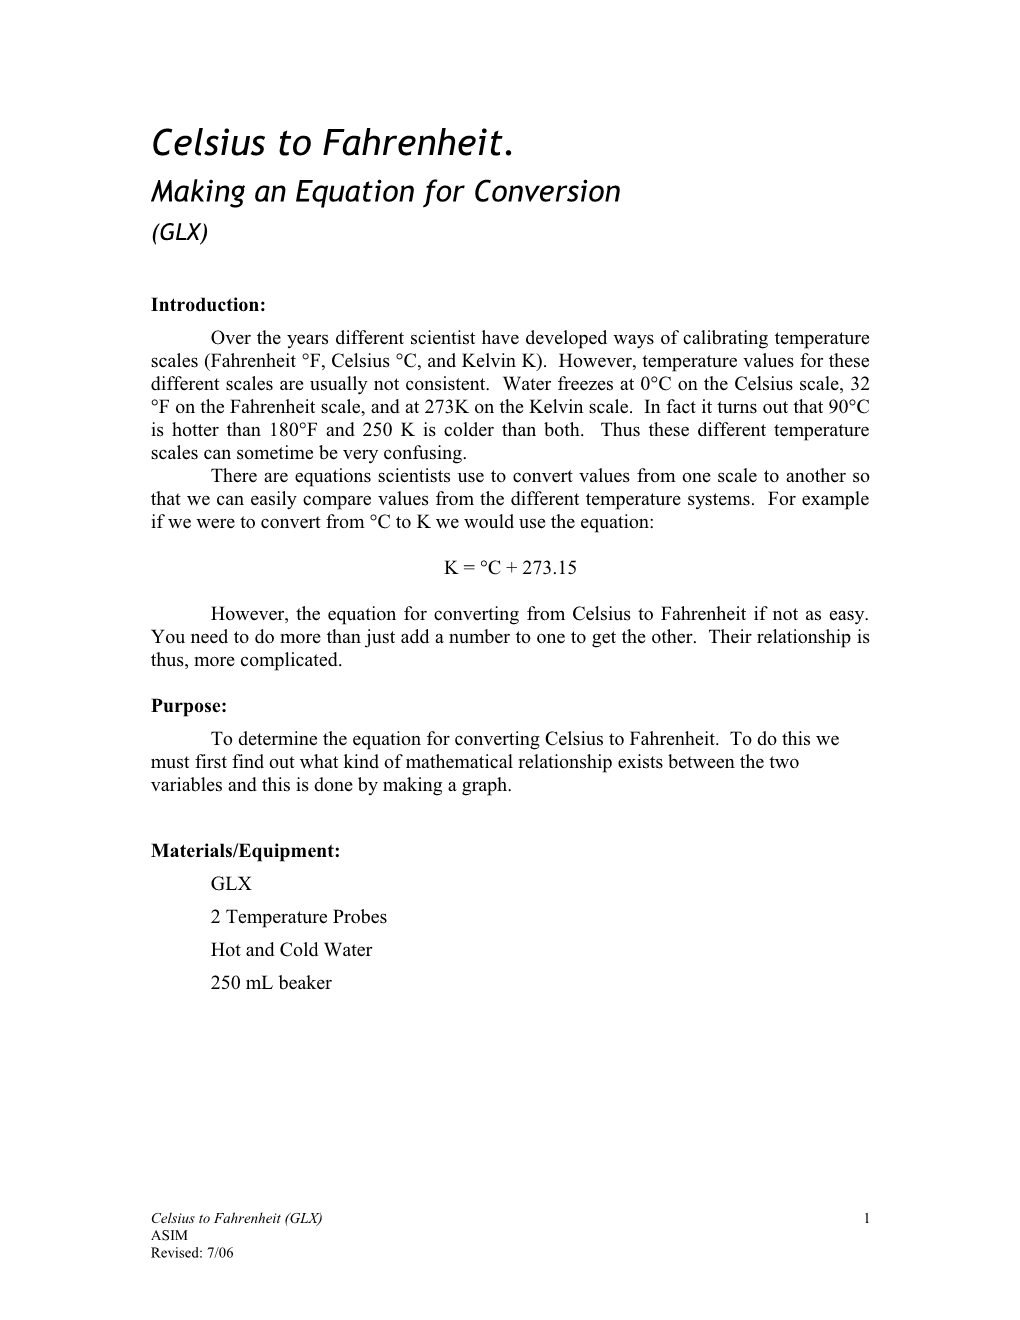 Making an Equation for Conversion